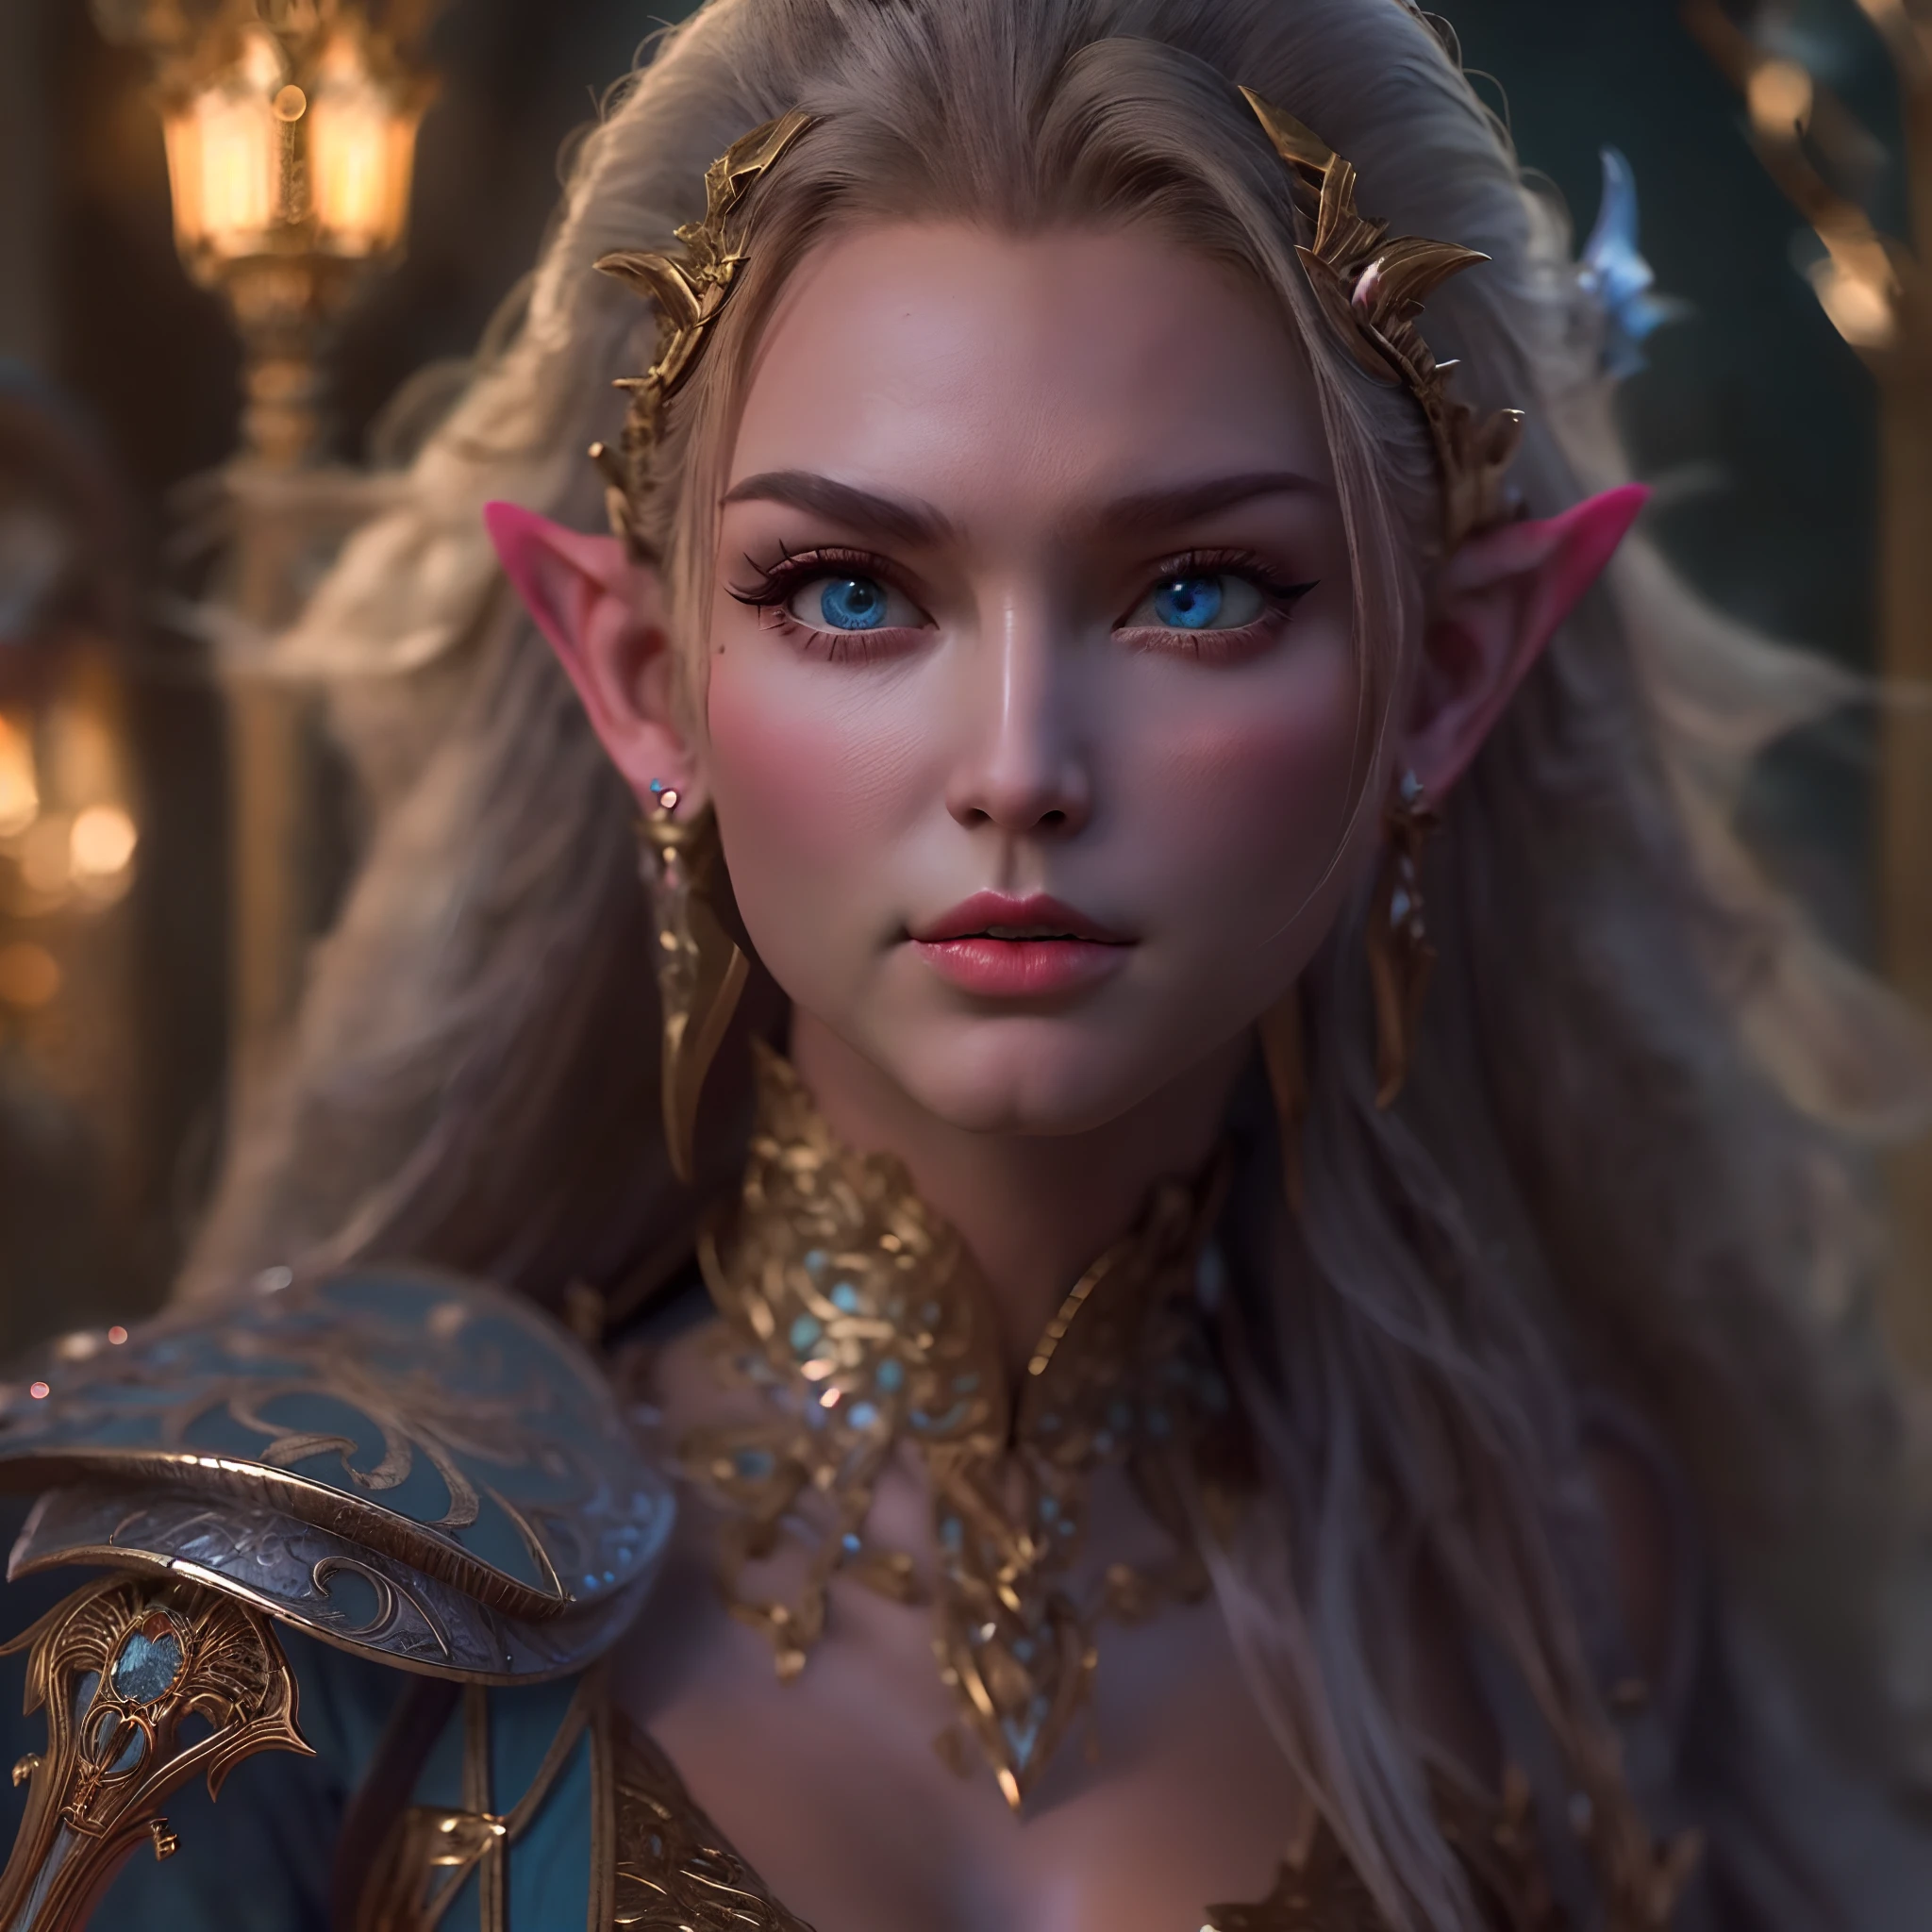 high details, best quality, 8k, [ultra detailed], masterpiece, best quality, (extremely detailed), dynamic angle, ultra wide shot, photorealistic, fantasy art, dnd art, rpg art, realistic art, a wide angle picture of an epic female elf, full body, [[anatomically correct]] full body (intricate details, Masterpiece, best quality: 1.6) casting a spell (intricate details, Masterpiece, best quality: 1.5), casting an epic spell, [colorful magical sigils in the air],[ colorful arcane markings floating] (intricate details, Masterpiece, best quality: 1.6) holding a [sword] (intricate details, Masterpiece, best quality: 1.6) holding a [sword glowing in red light] (intricate details, Masterpiece, best quality: 1.6). in fantasy urban street ( (intricate details, Masterpiece, best quality: 1.6), a female, beautiful epic female elf, wearing elven leather armor (intricate details, Masterpiece, best quality: 1.3), high heeled leather boots, ultra detailed face (intricate details, Masterpiece, best quality: 1.6), small pointed ears, thick hair, long hair, dynamic hair, fair skin intense eyes, fantasy city background (intricate details, Masterpiece, best quality: 1.6), sun light, backlight, depth of field (intricate details, Masterpiece, best quality: 1.3), high details, best quality, highres, ultra wide angle